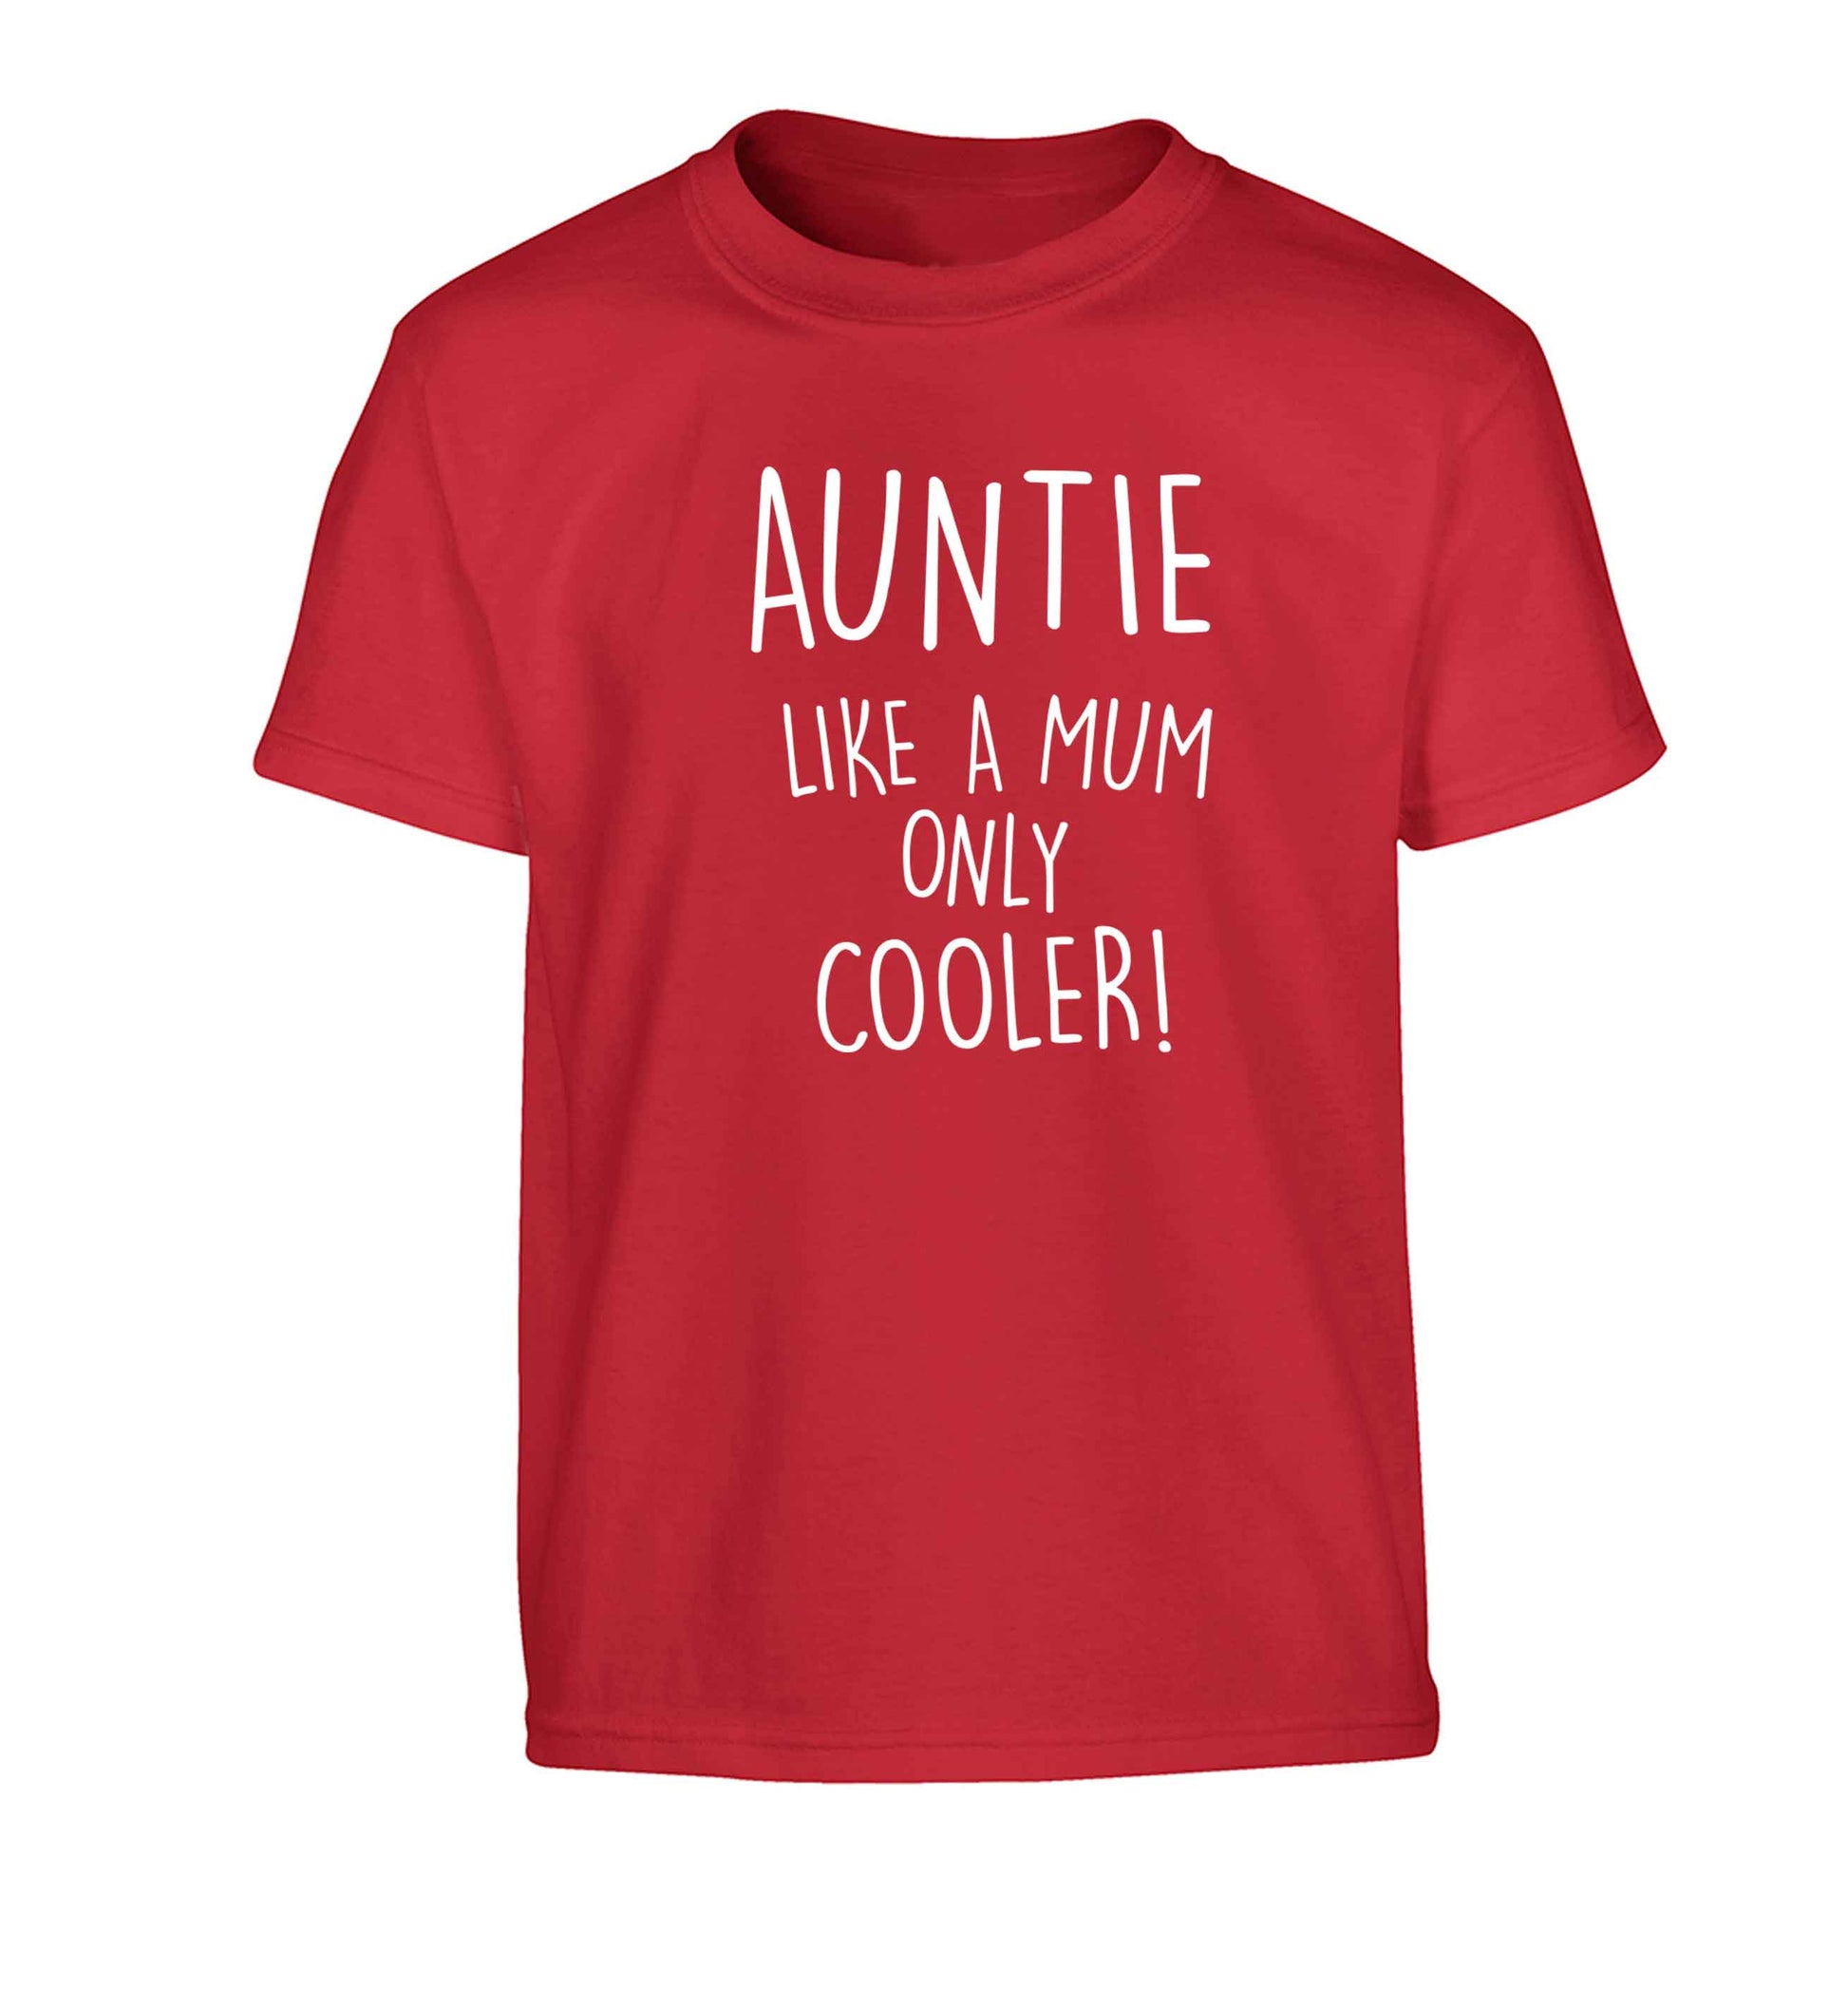 Auntie like a mum only cooler Children's red Tshirt 12-13 Years